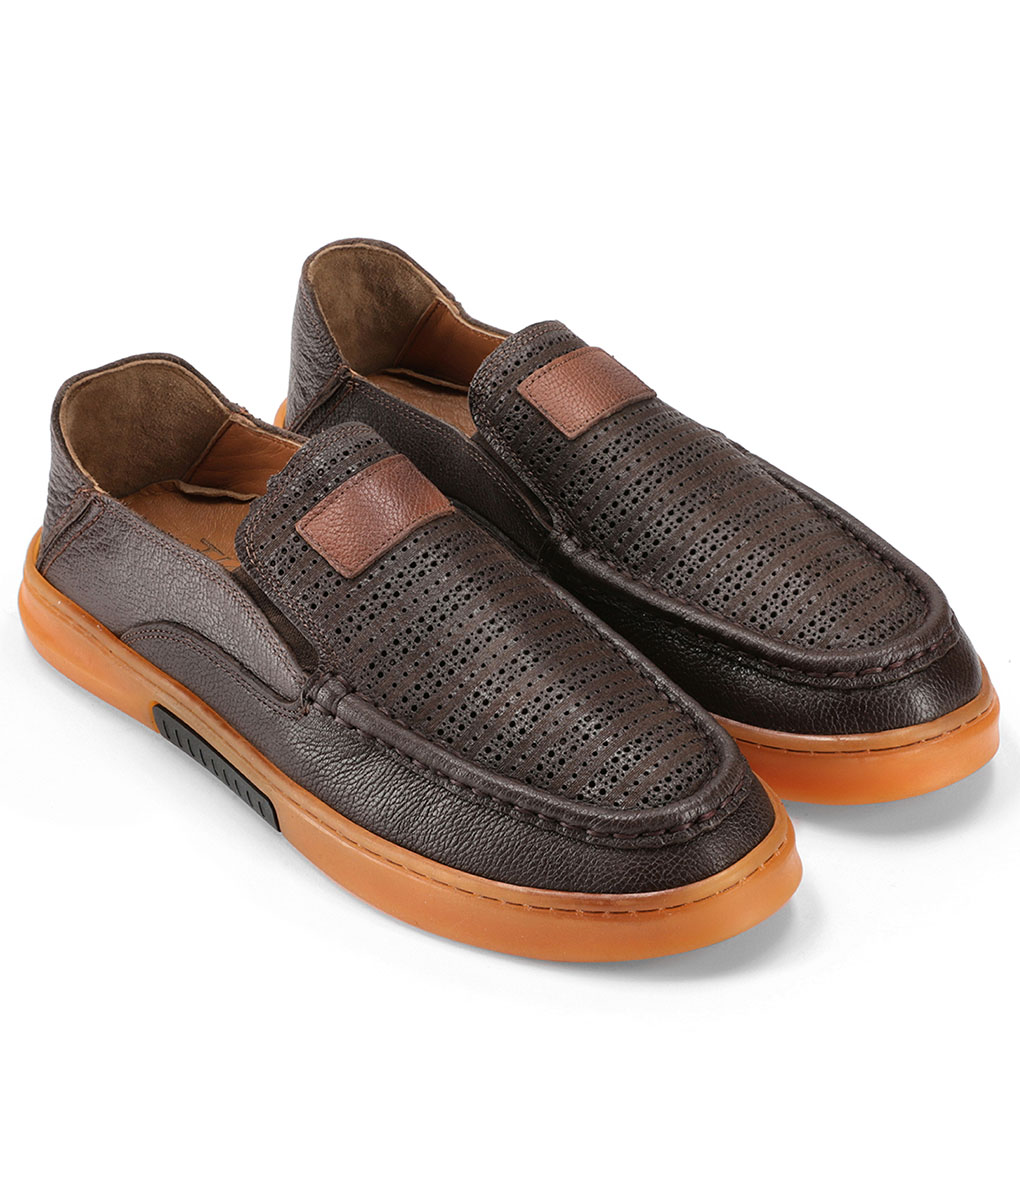 Men's Dotted Brown Leather Shoes with Brown Sole